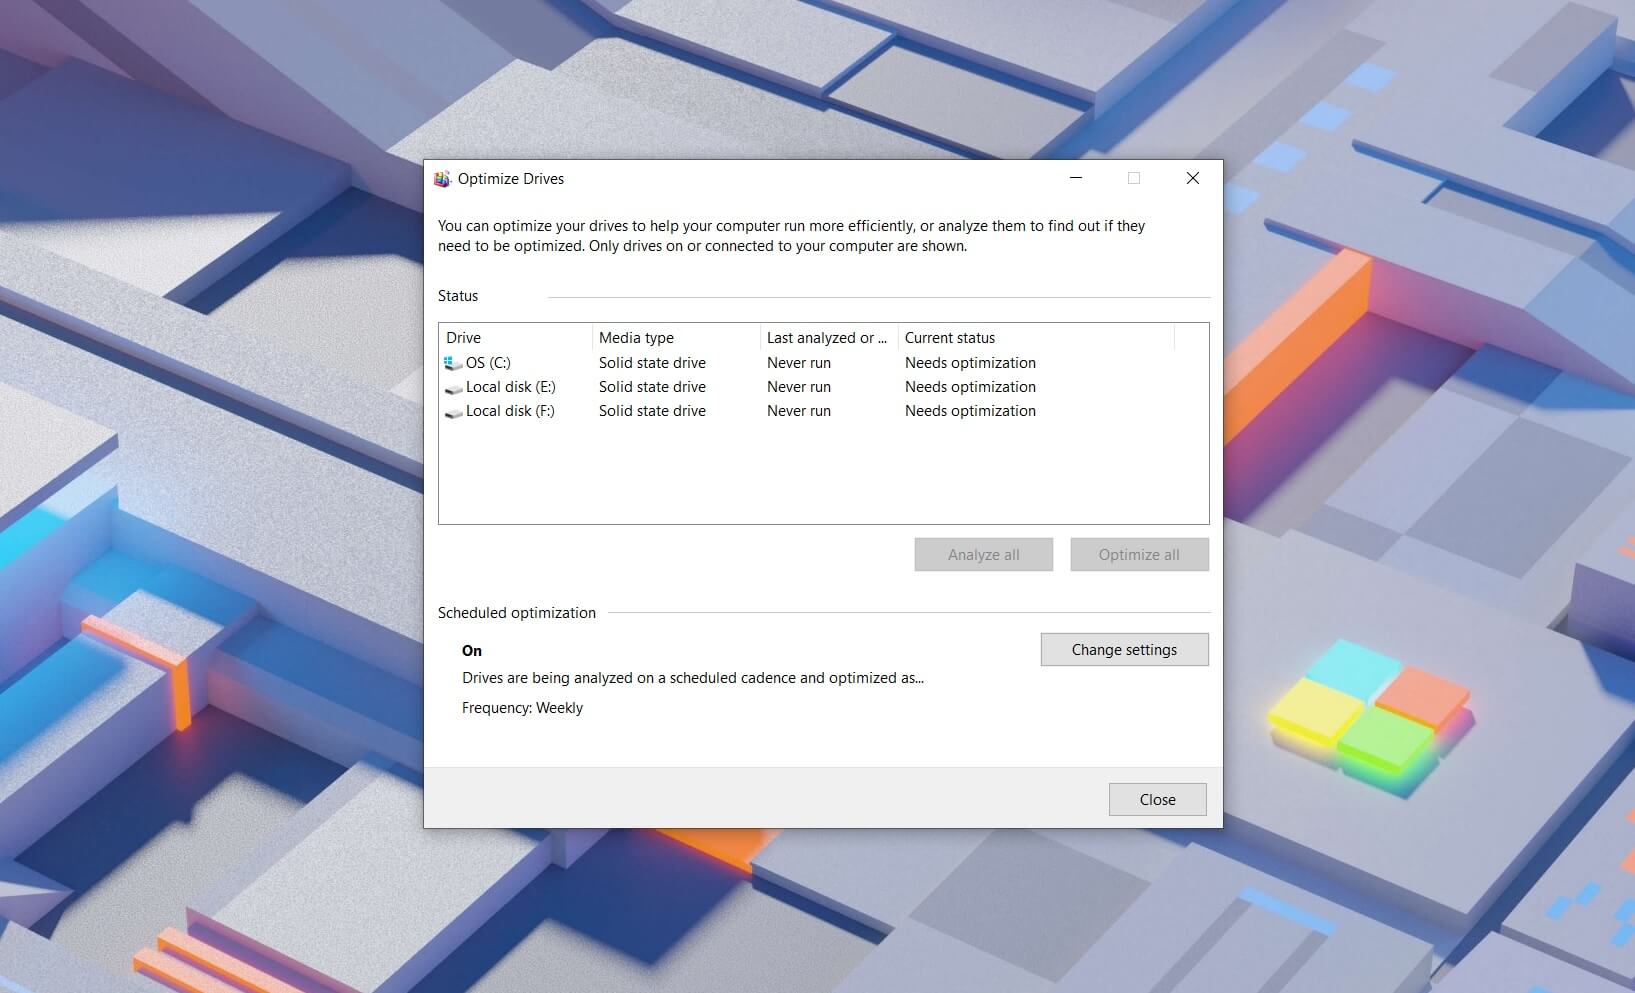 This year’s major Windows 10 update is finally ready for more PCs Windows-10-Defragment-Tool.jpg